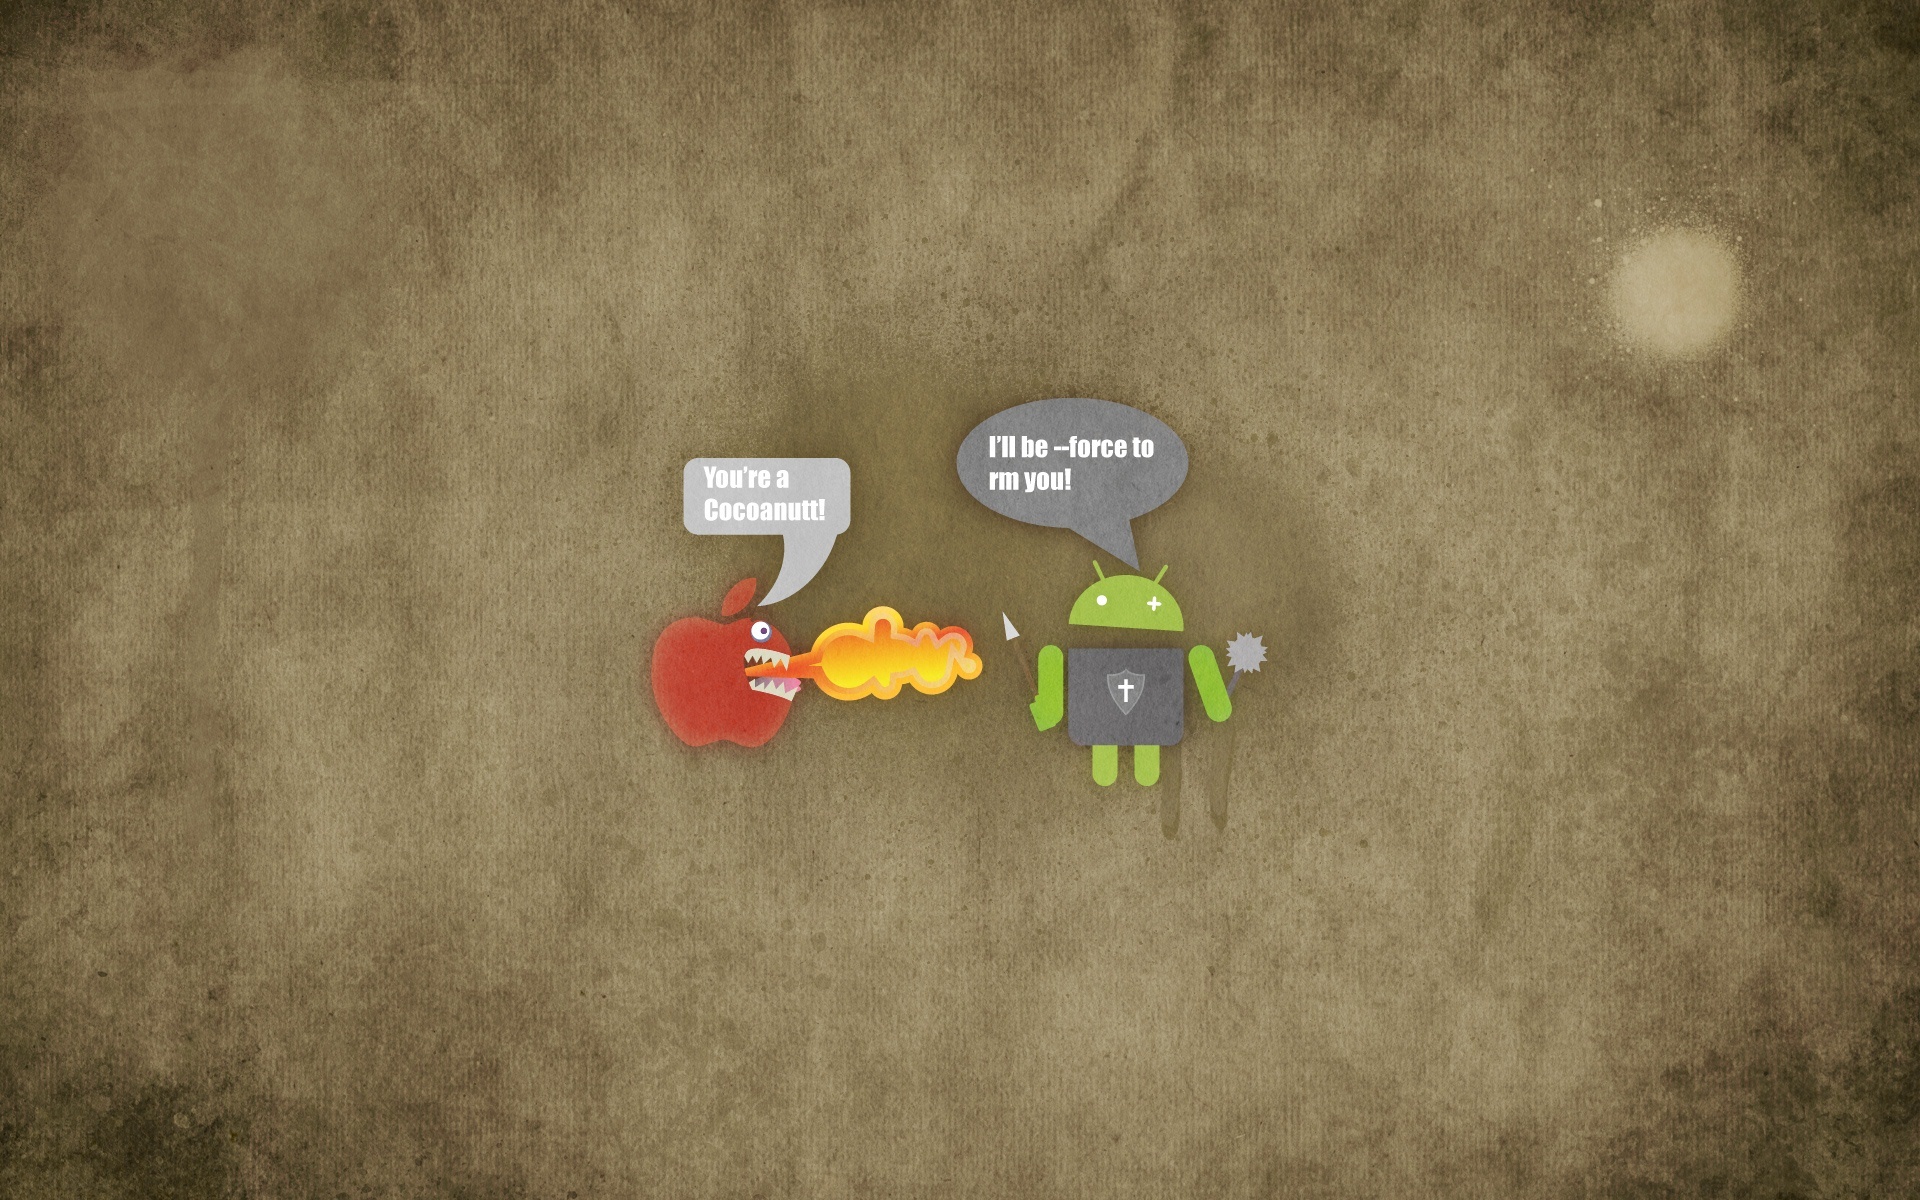 Apple and Android shouting